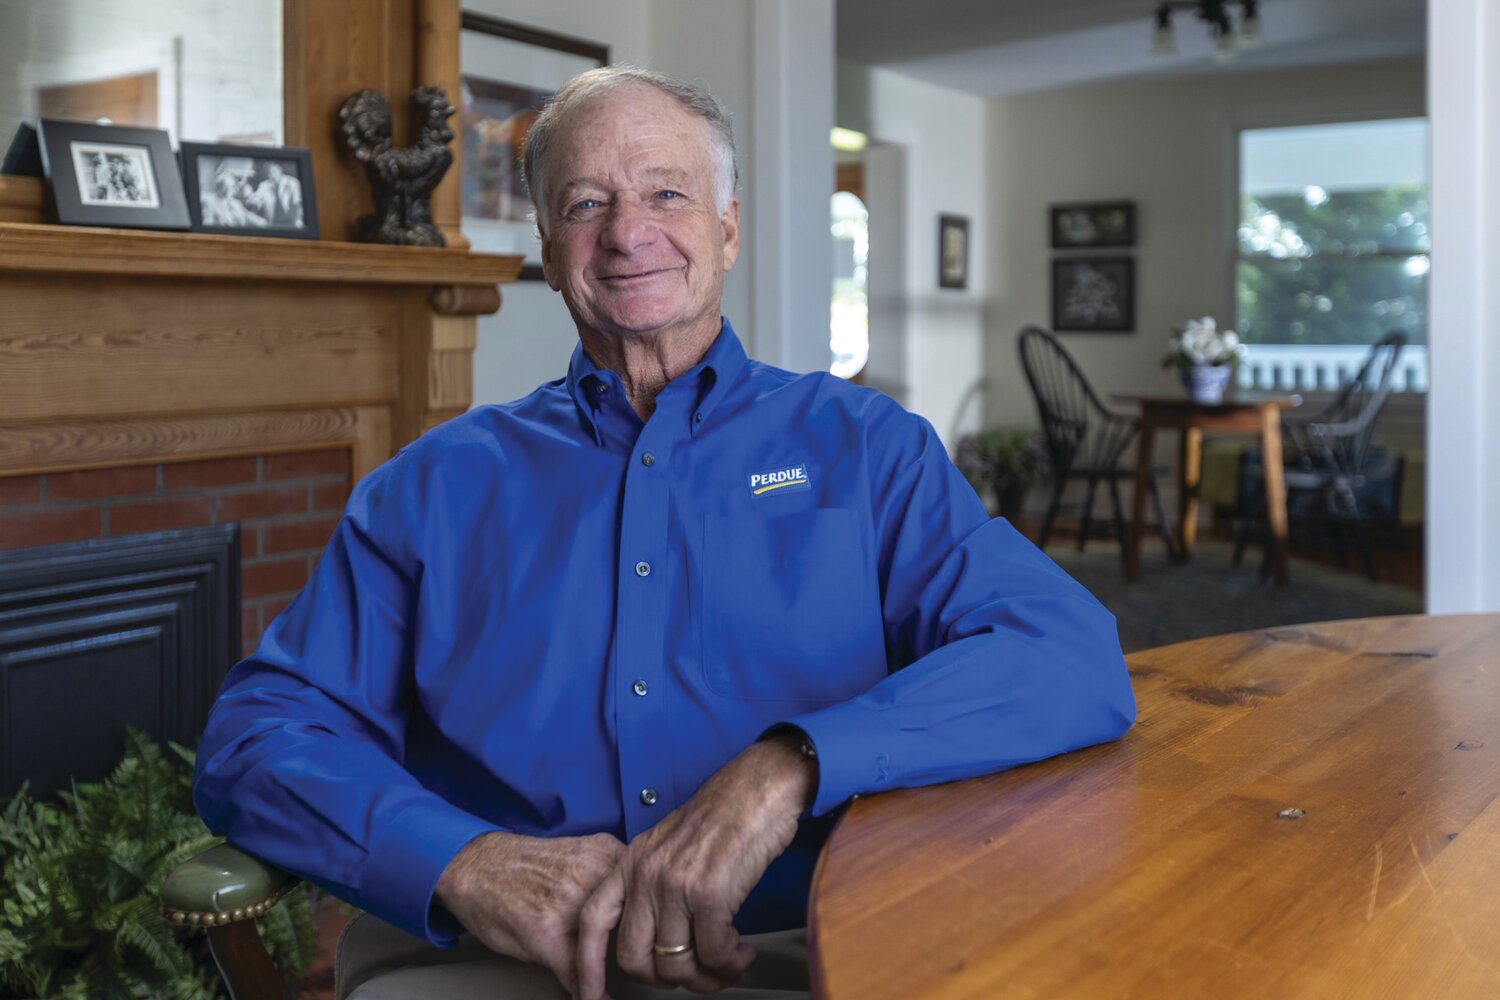 Jim Perdue was chosen for the National Protein and Food Distributors Association Lifetime Achievement Award. [Courtesy photo]